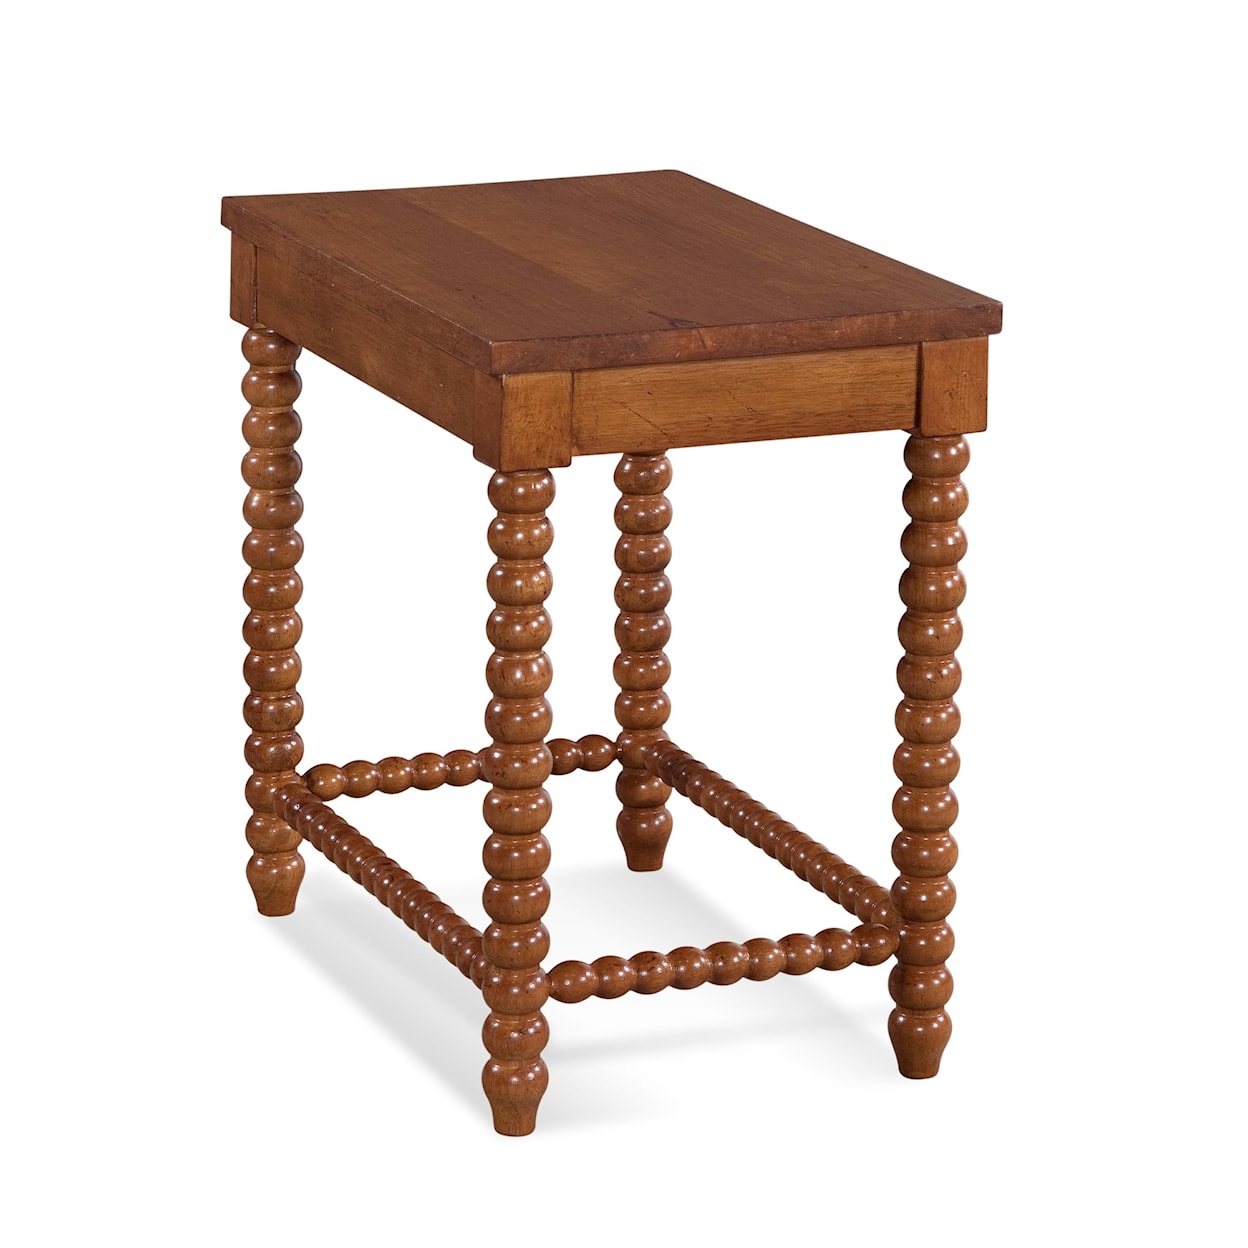 Braxton Culler Lind Island Lind Island Chairside Table